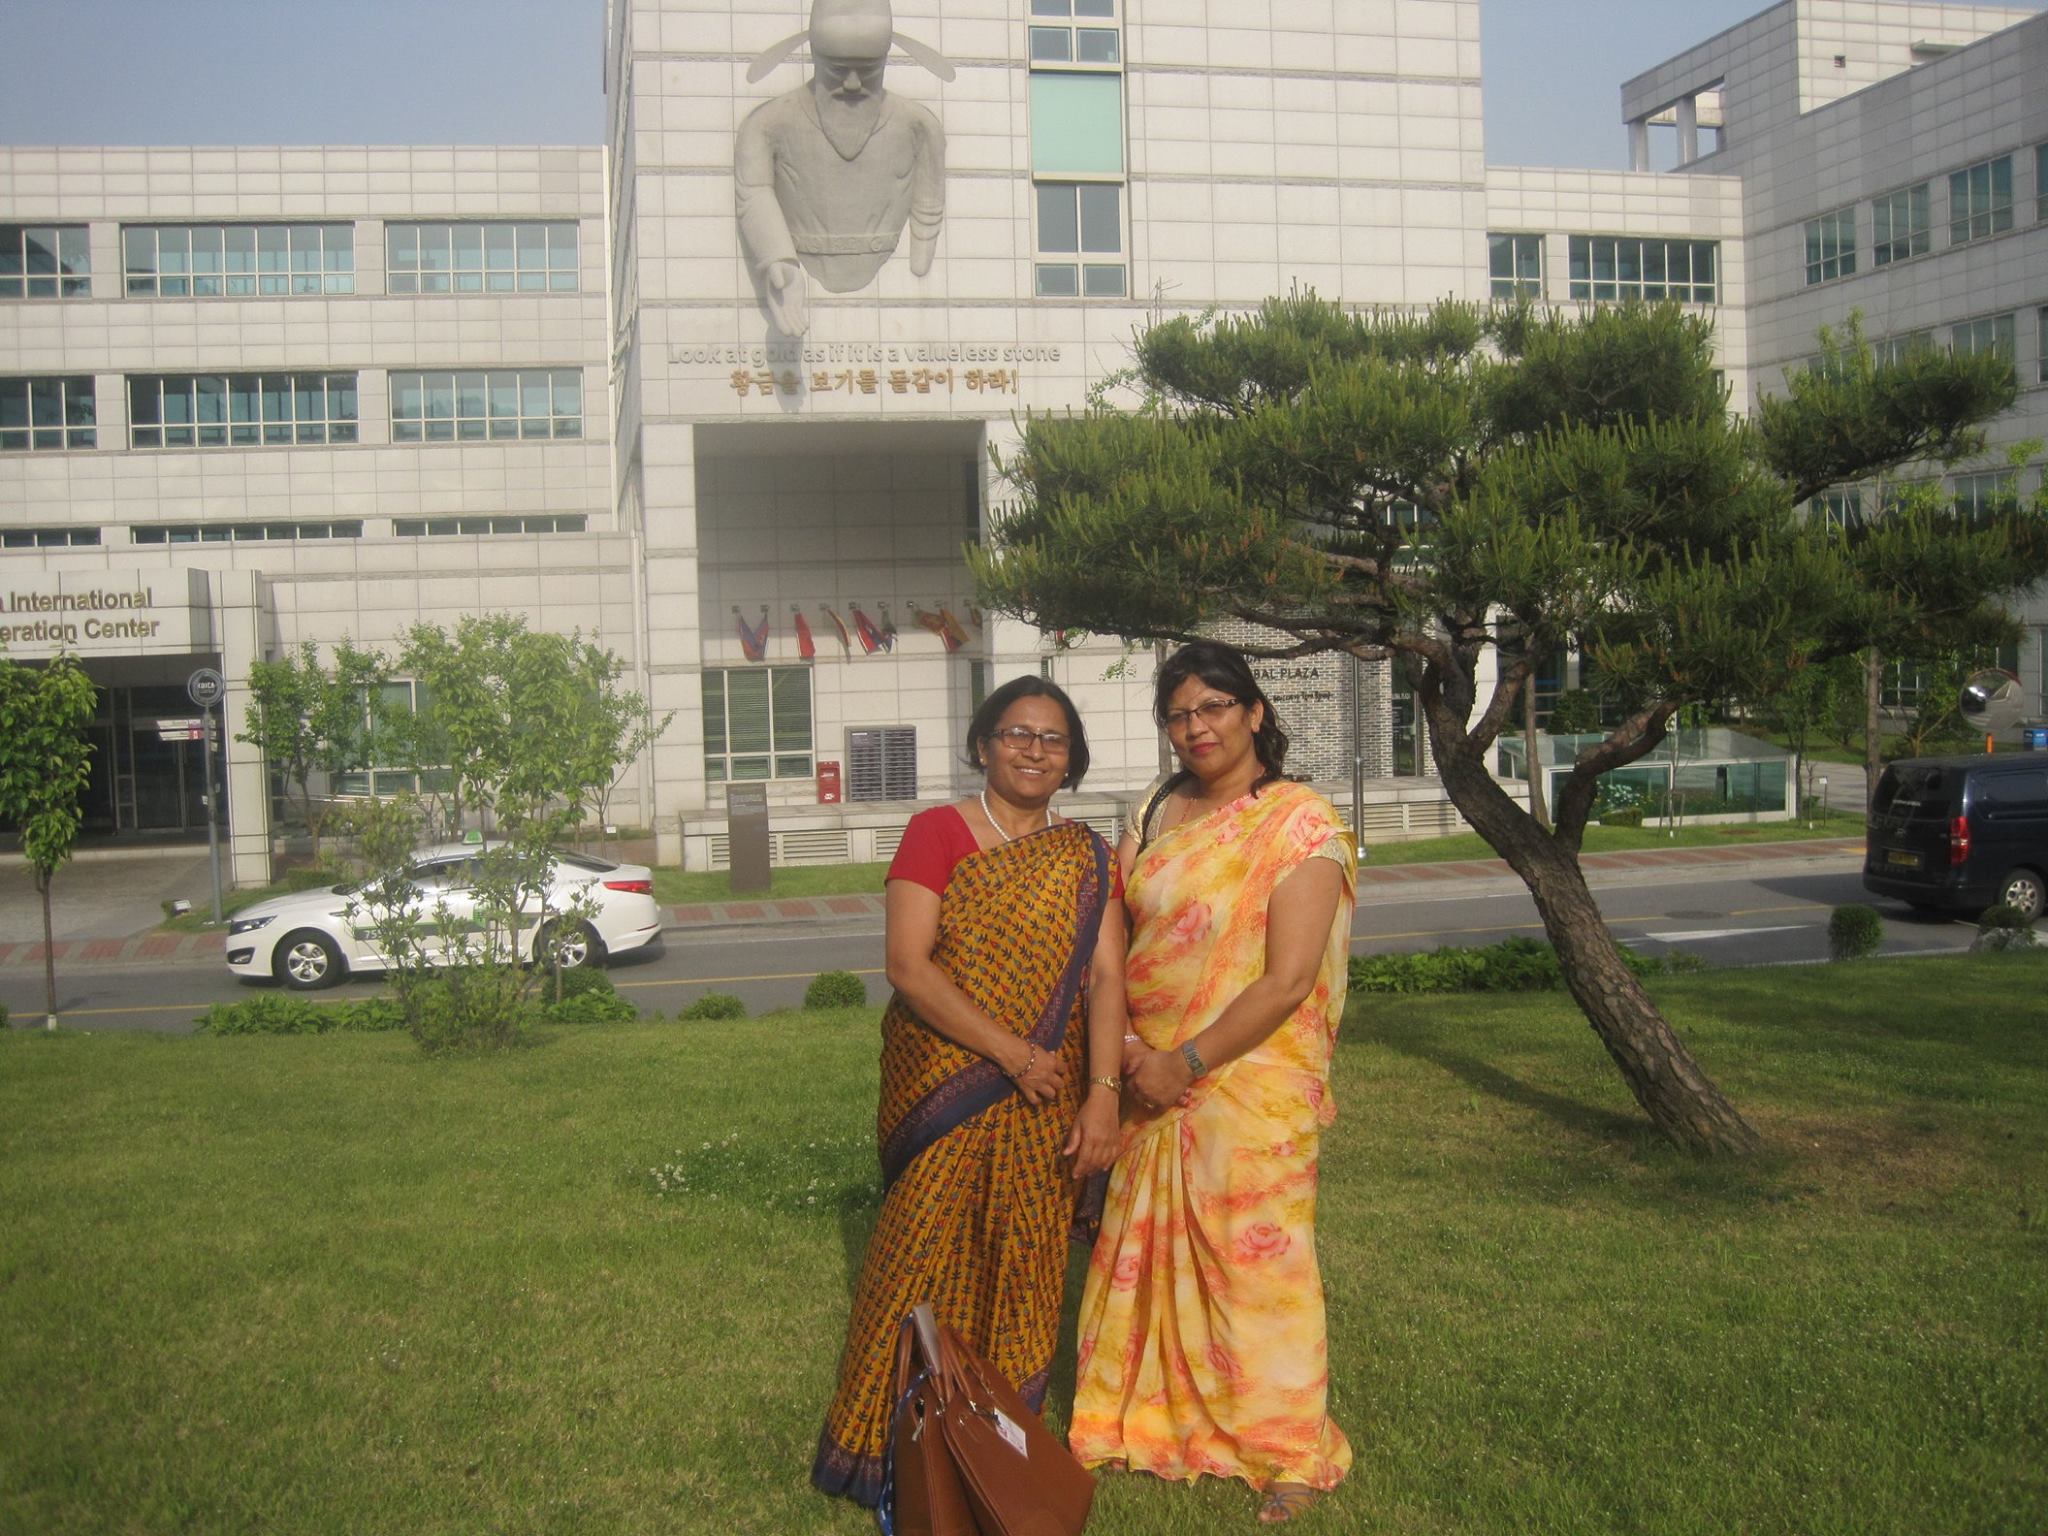 Paru and her colleague in Nepalese sari in South Korea.